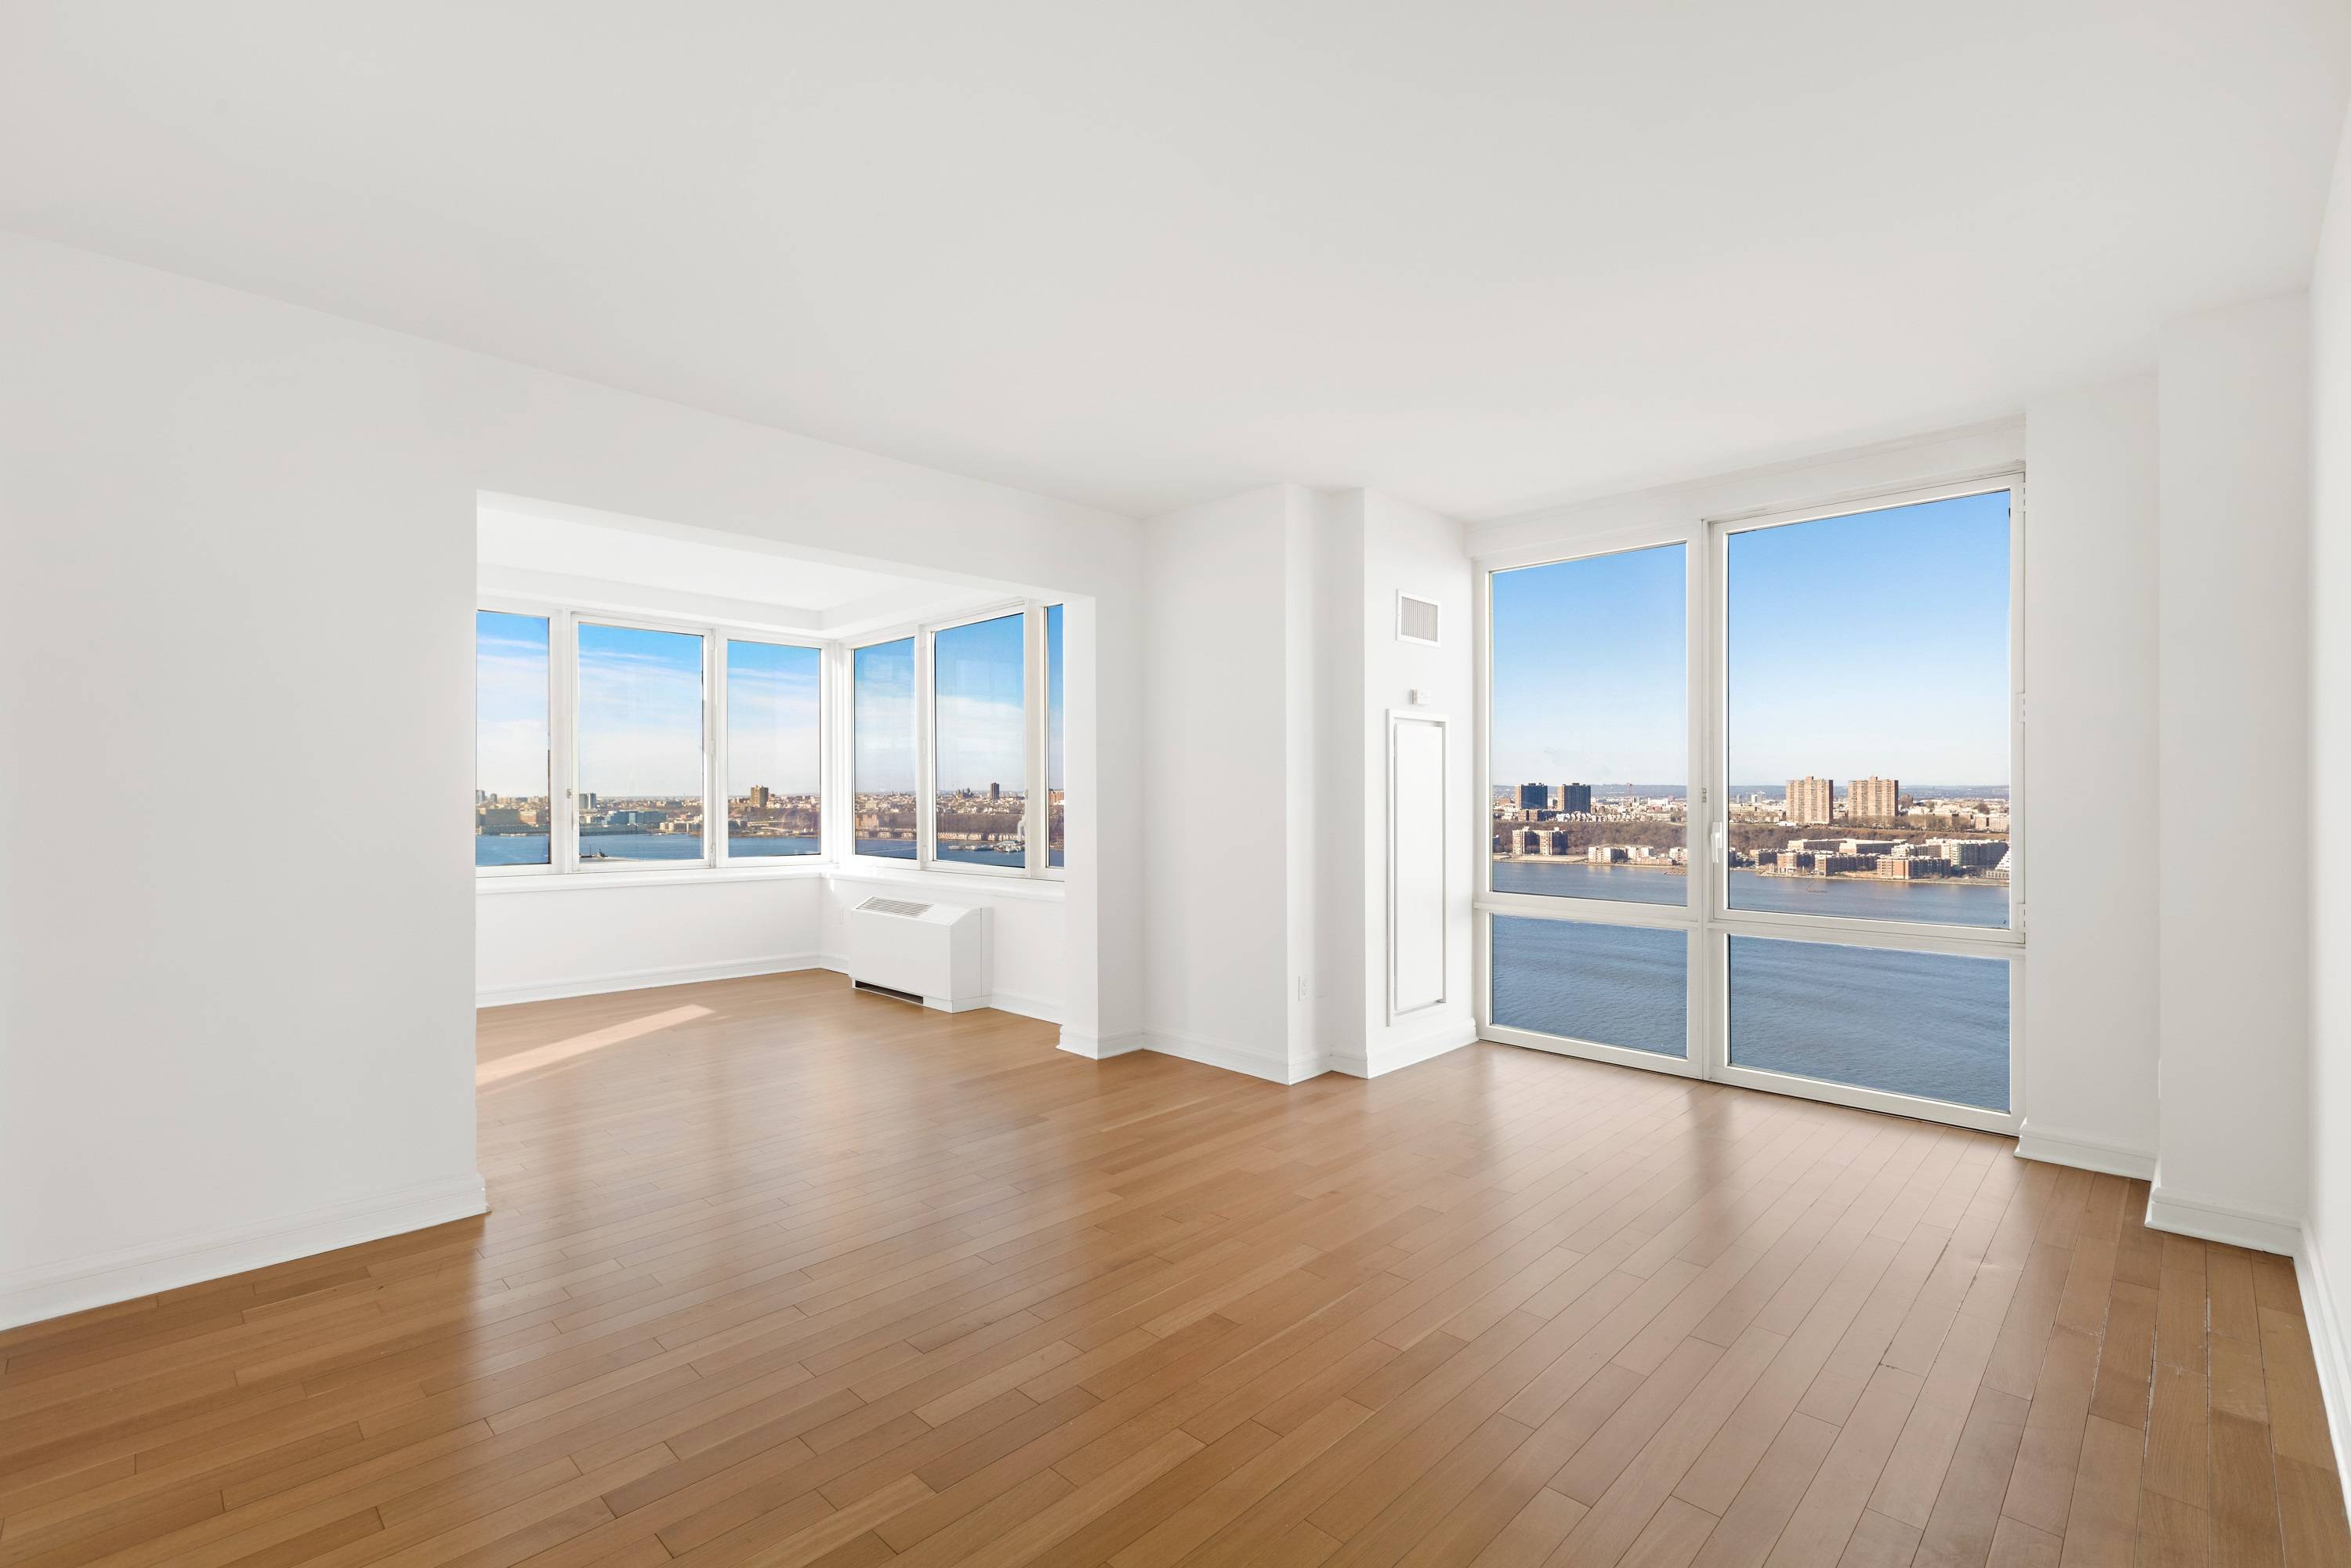 Stunning 3 Bedroom 3 Bathroom Residence with fascinating Hudson river & city views!